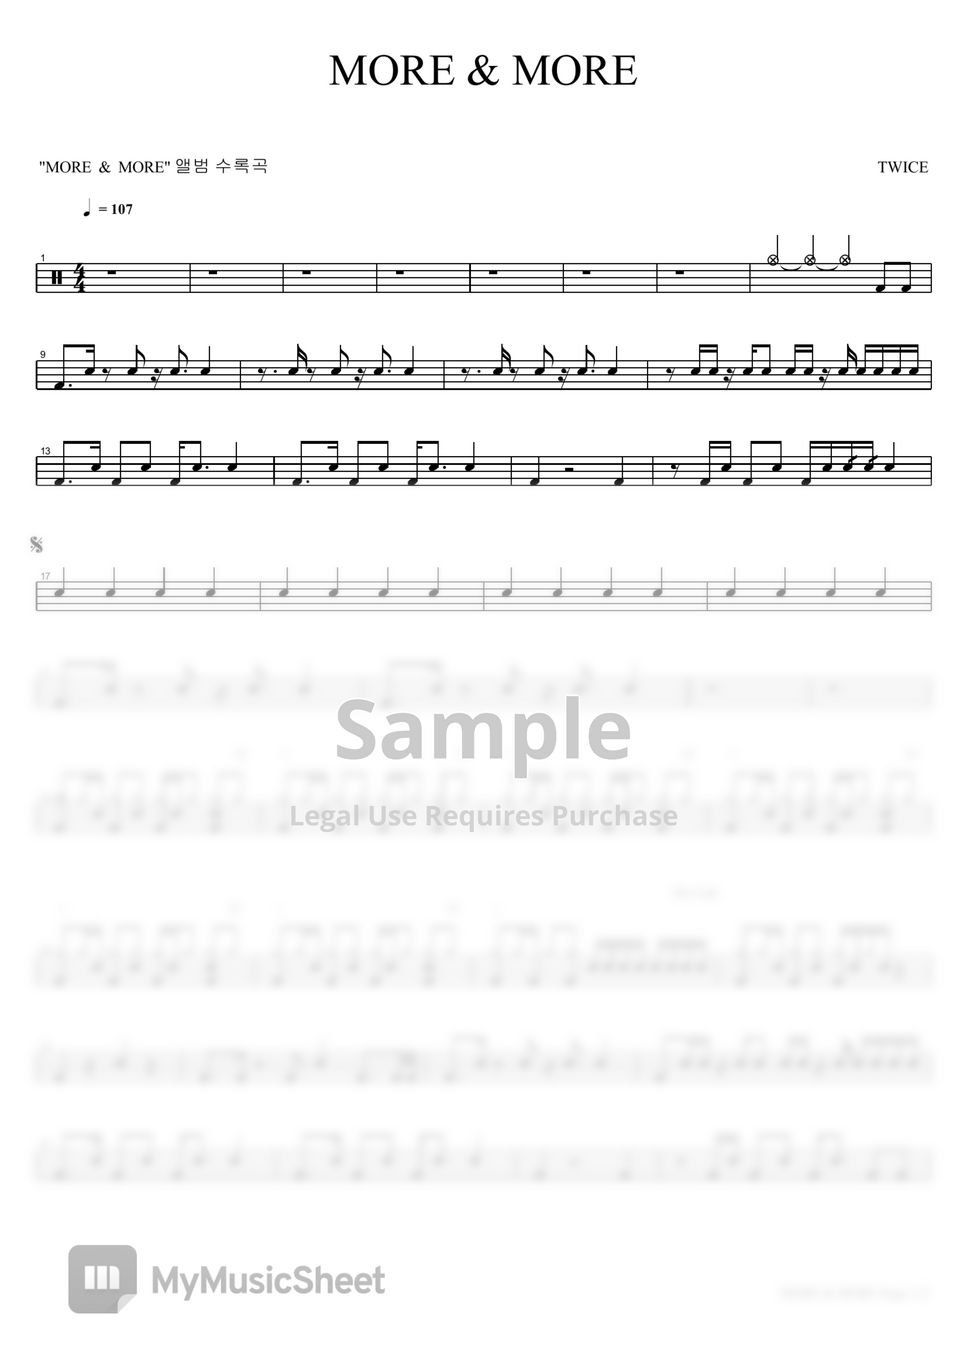 TWICE - MORE & MORE.pdf by COPYDRUM